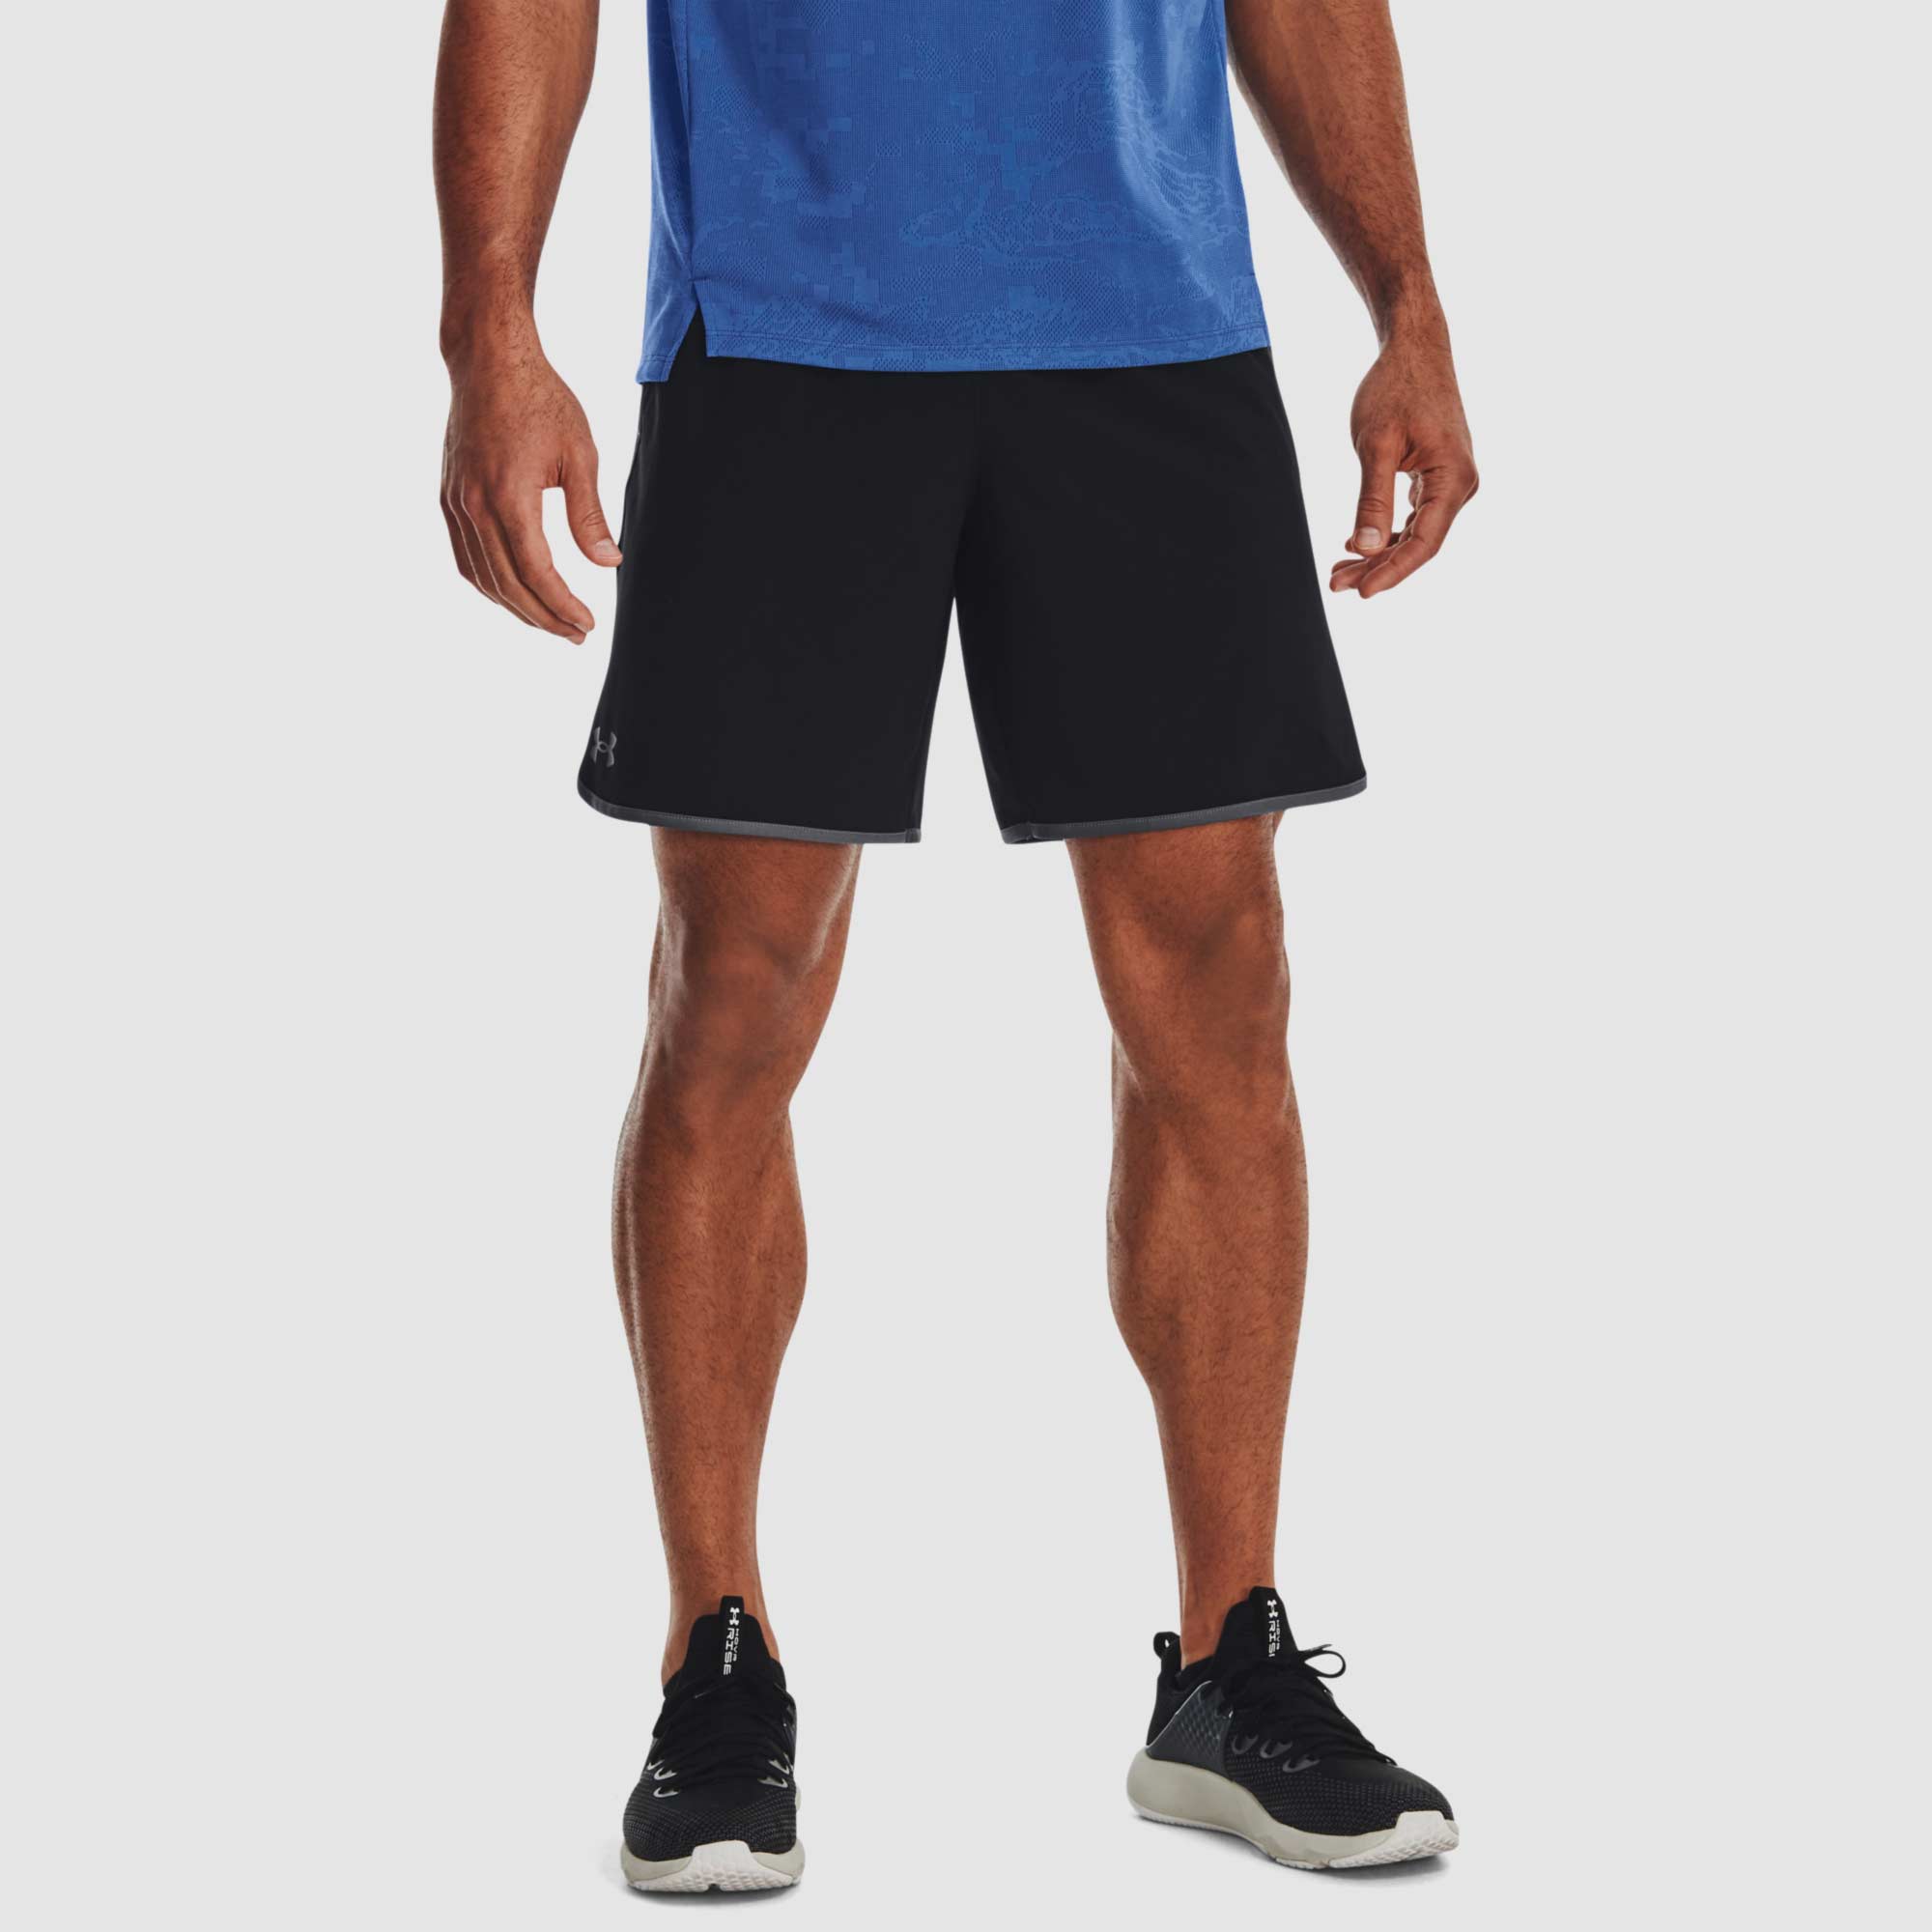 Under Armour Mens HIIT Woven 8 Inch Short